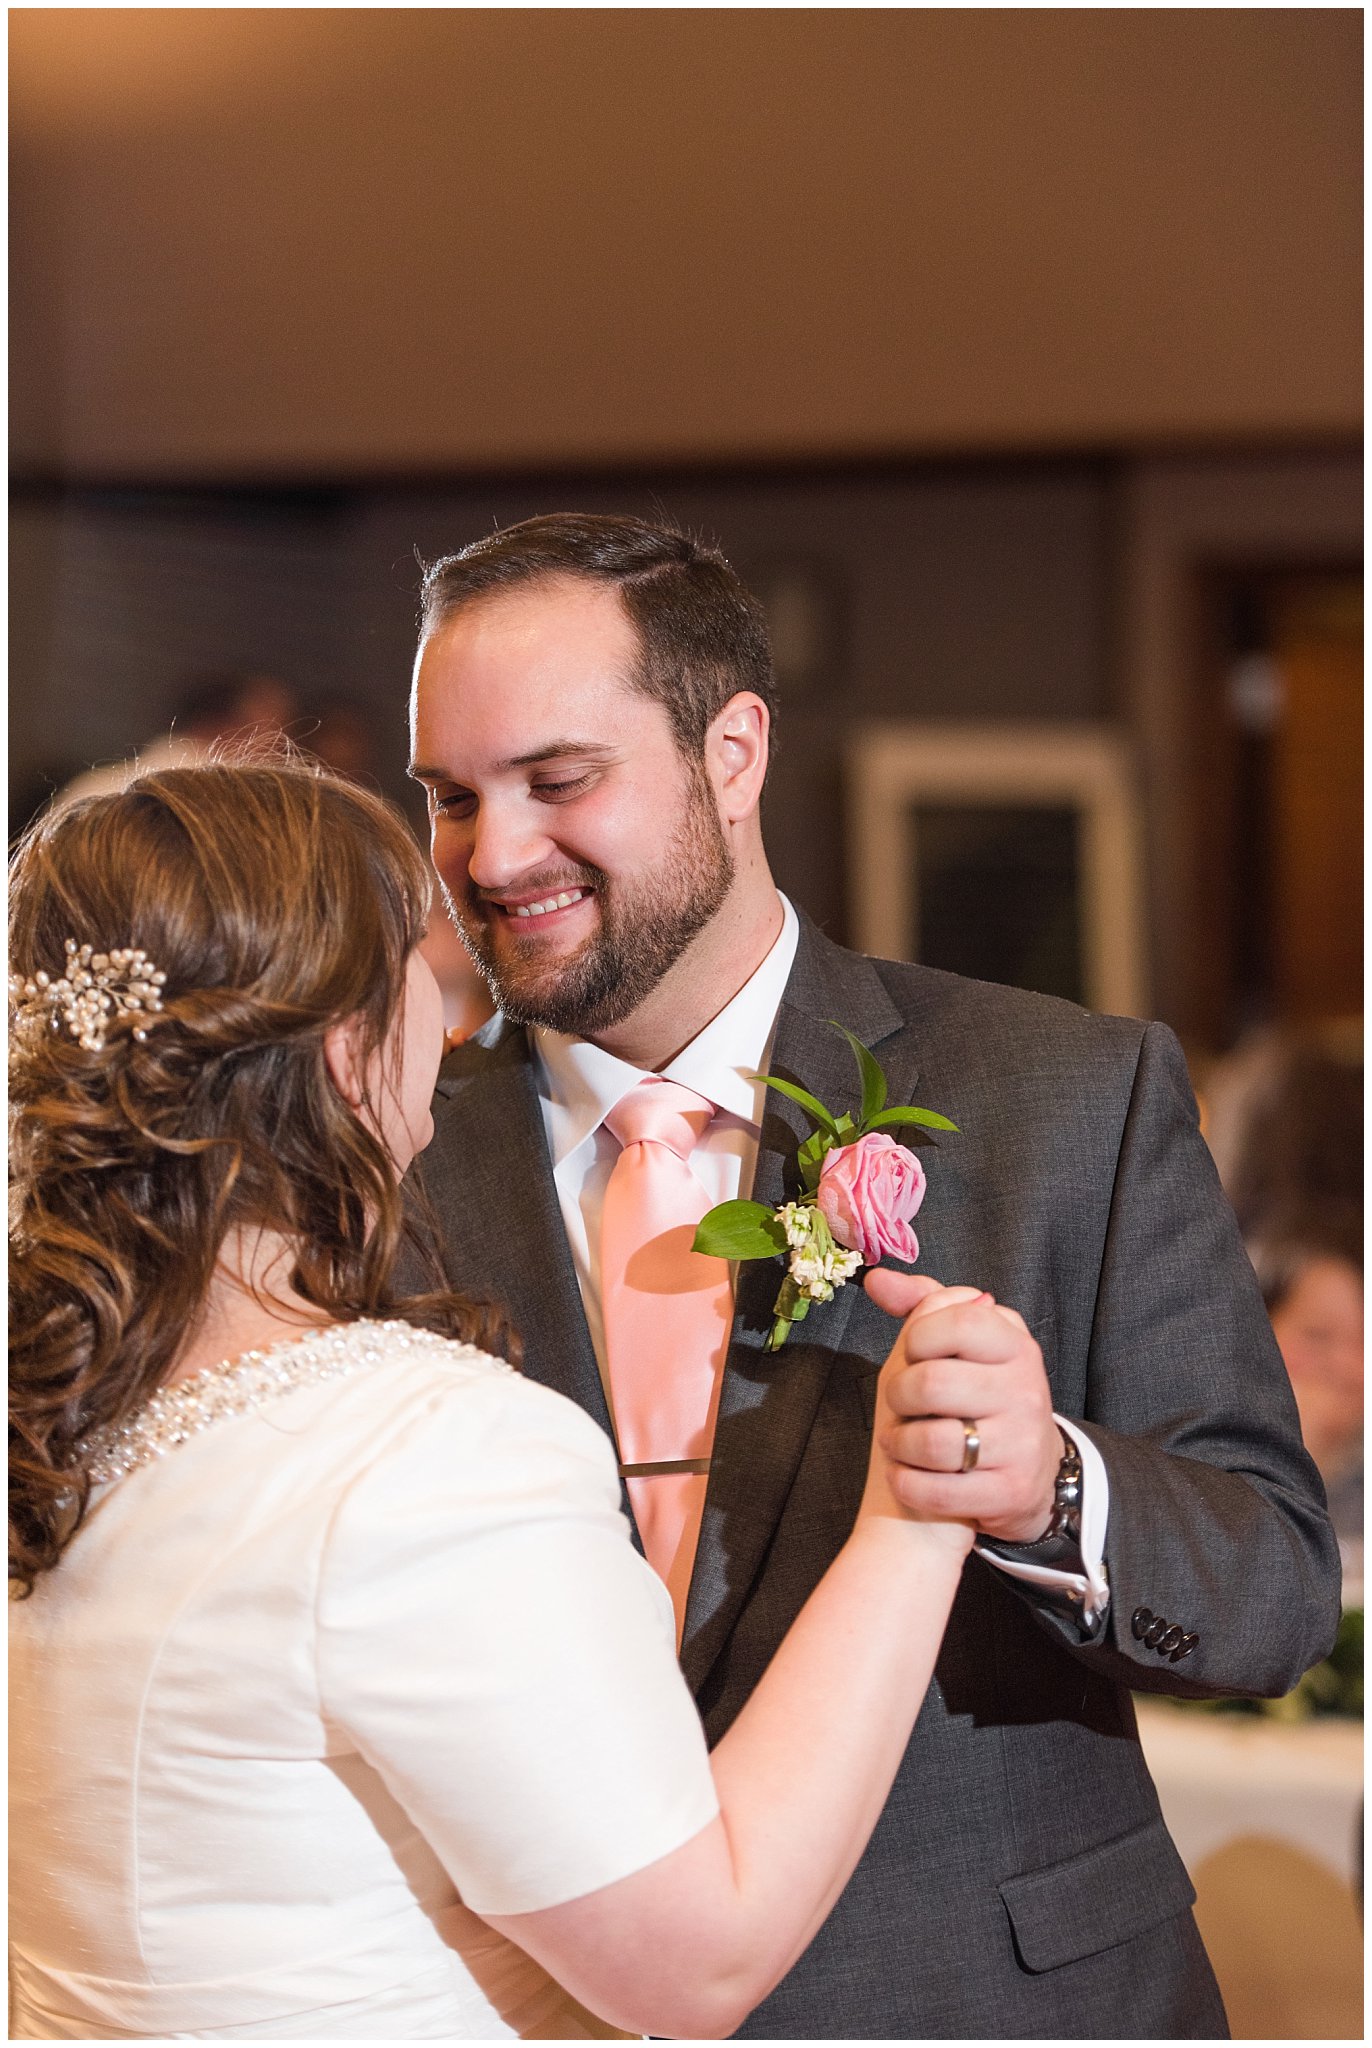 Bride and groom first dance | Ogden Temple Wedding | Jessie and Dallin Photography